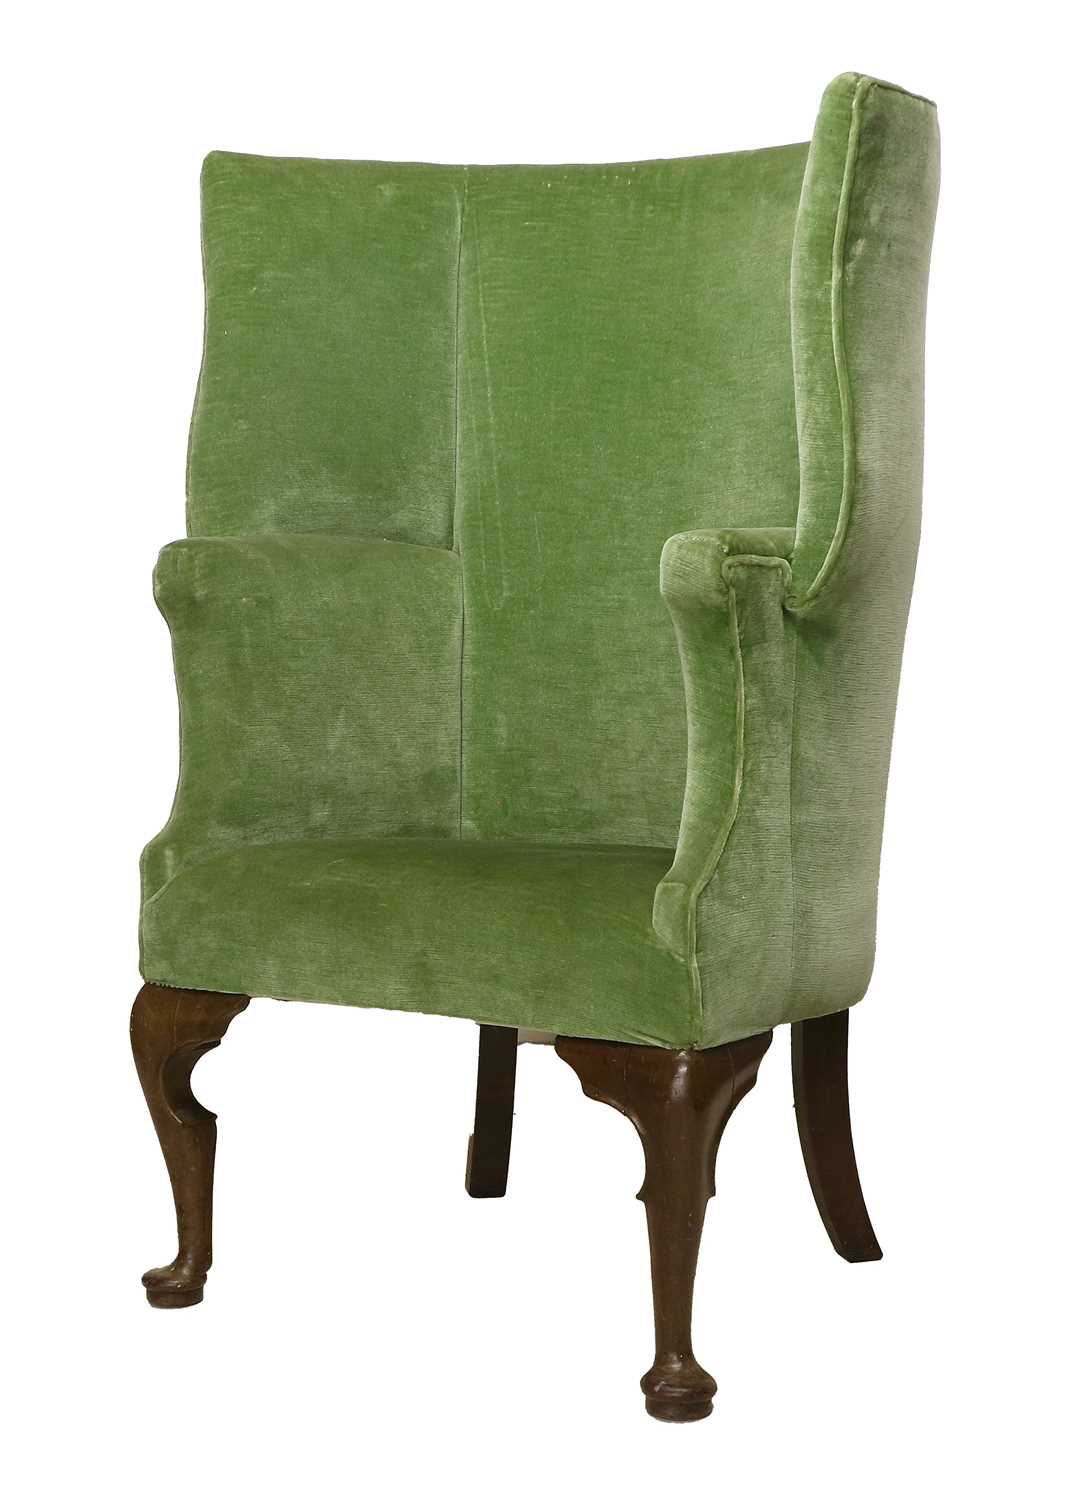 A George III-Style Barrel-Shaped Armchair, 19th century, covered in green velvet, with overstuffed